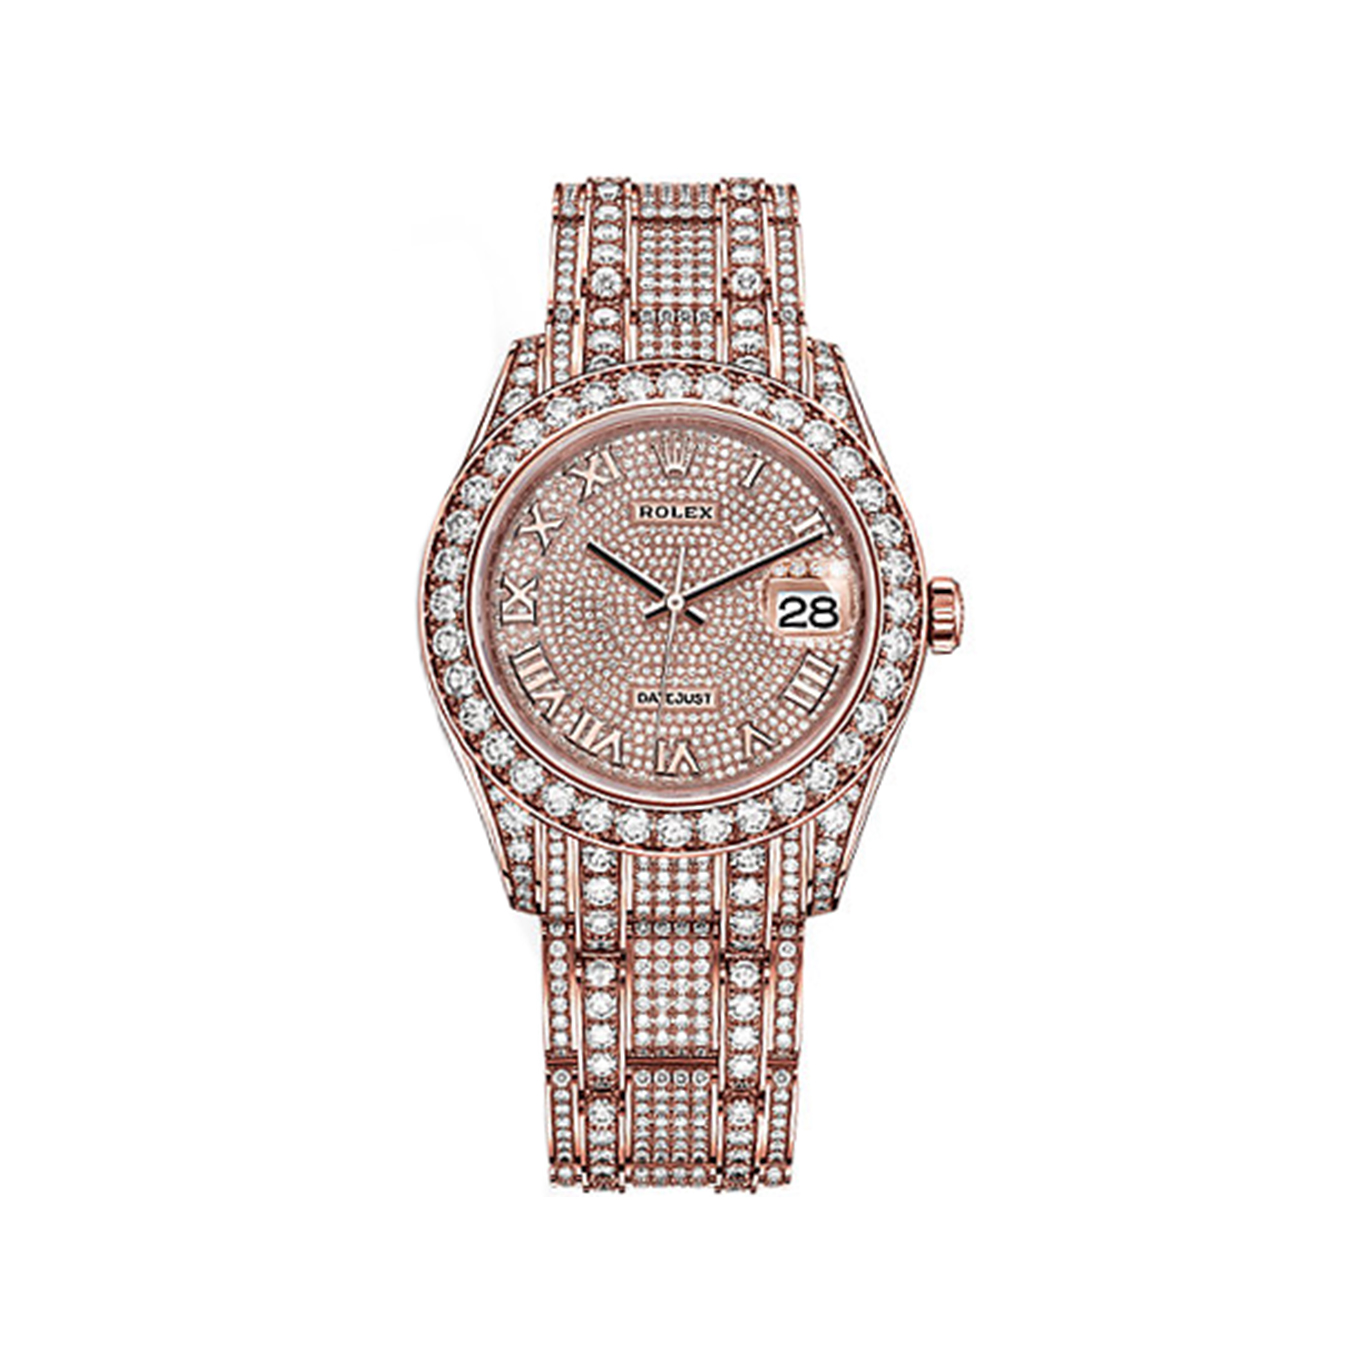 Pearlmaster 39 86405RBR Rose Gold & Diamonds Watch (18 ct Gold Paved With 713 Diamonds)